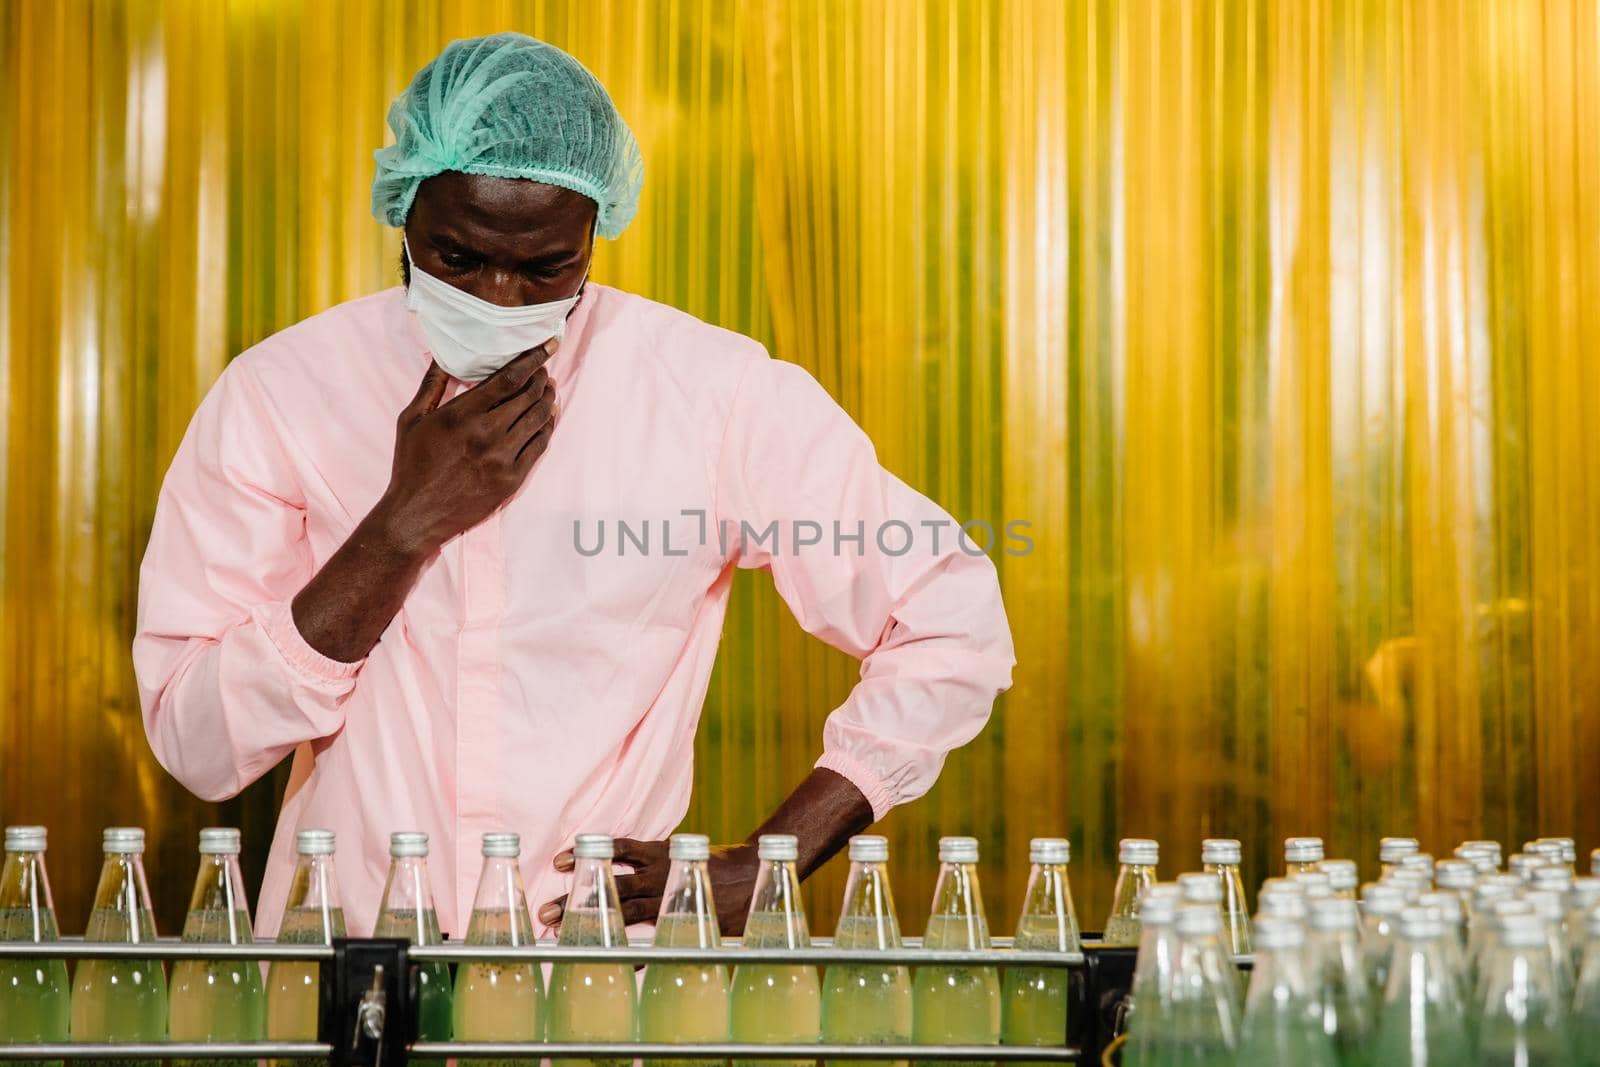 African Black man worker labor working in food and drink industry factory with hygiene work fruit juice production line inspector staff. by qualitystocks